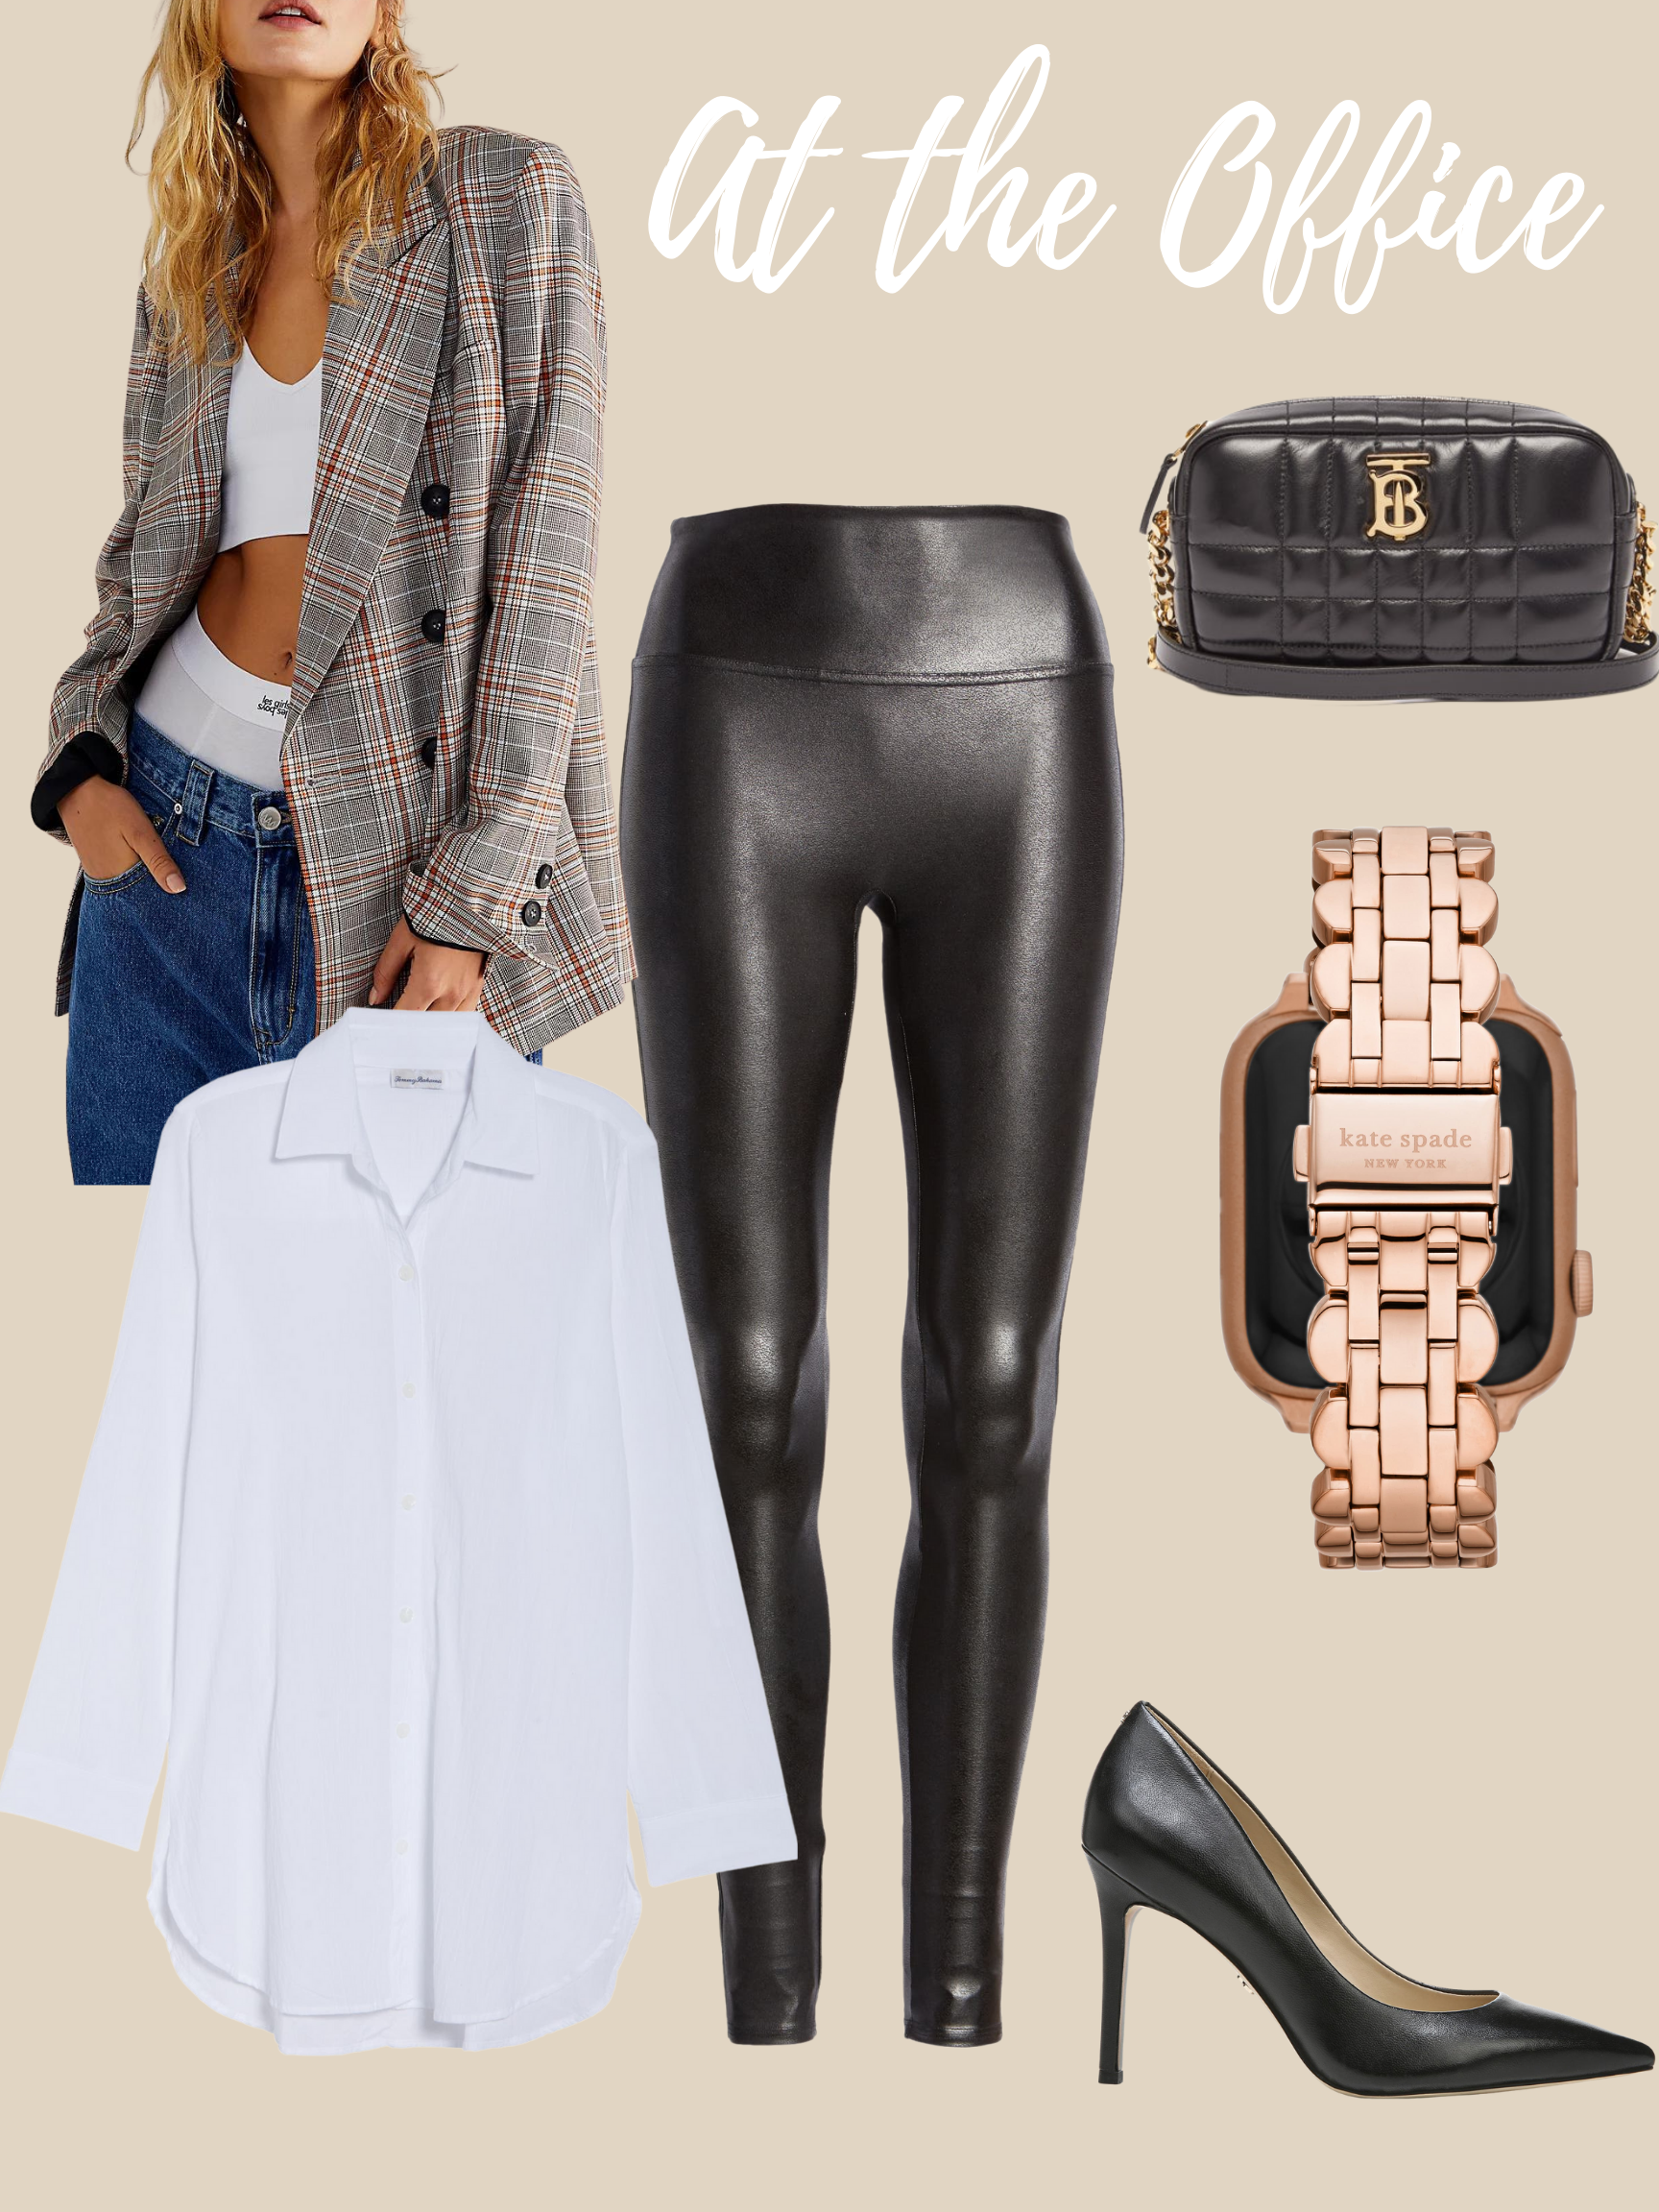 Black Quilted Jacket with Black Leather Leggings Outfits (5 ideas